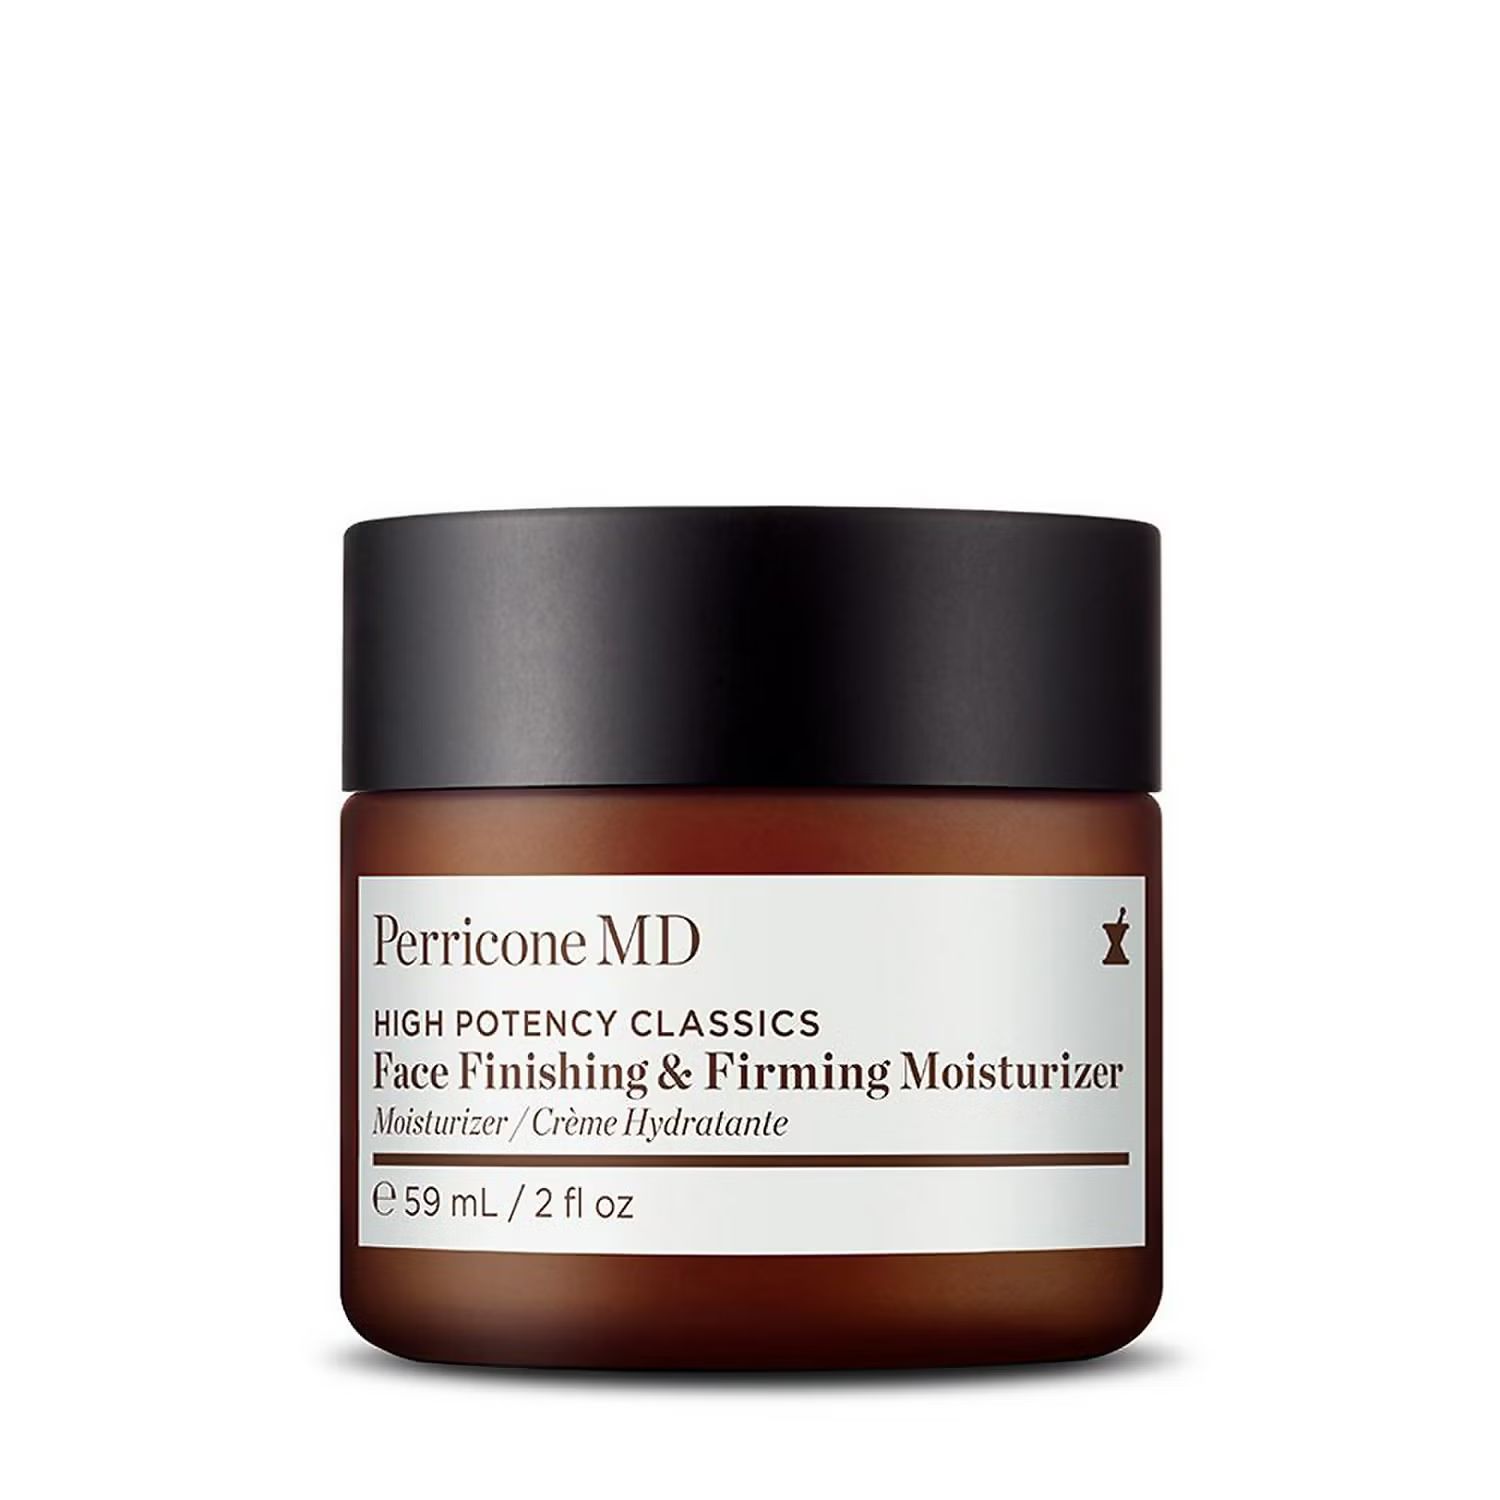 High Potency Classics Face Finishing & Firming Moisturizer | PerriconeMD US